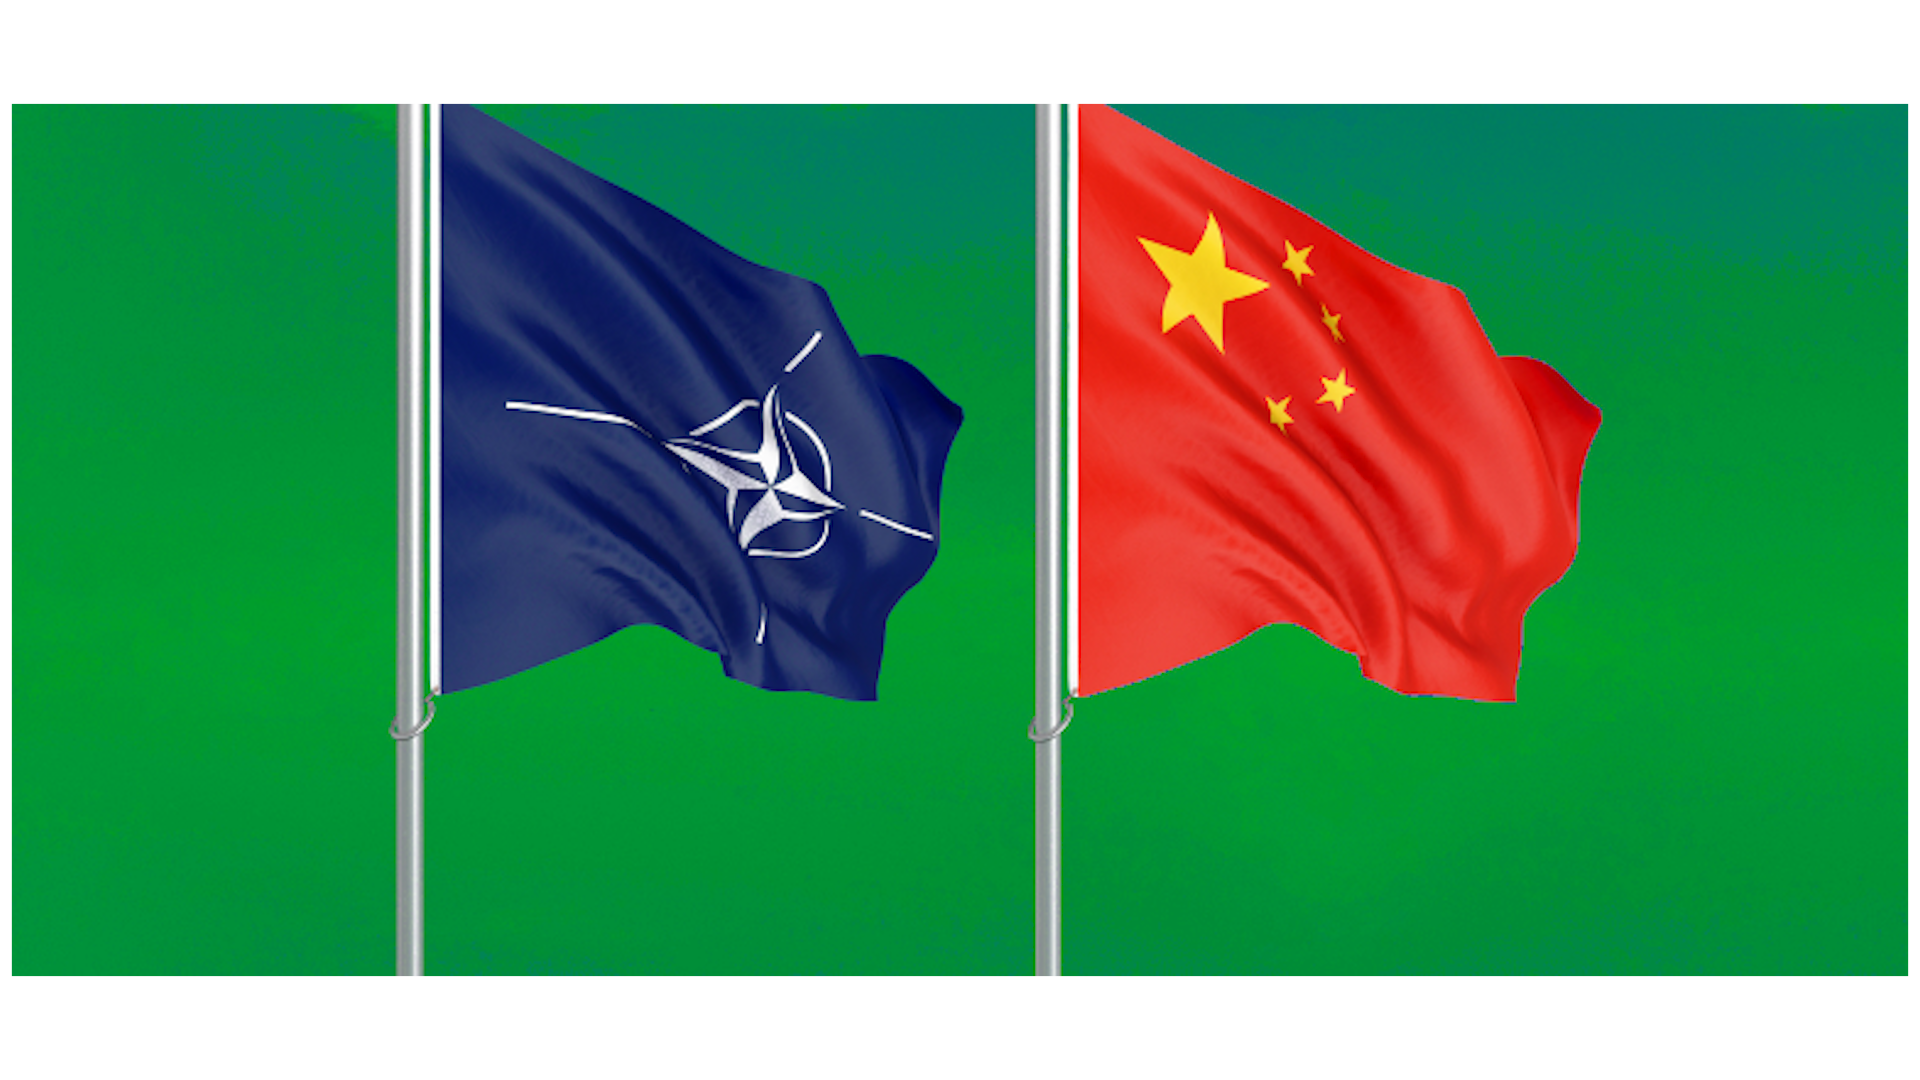 India’s Options If China Does A NATO In South Asia